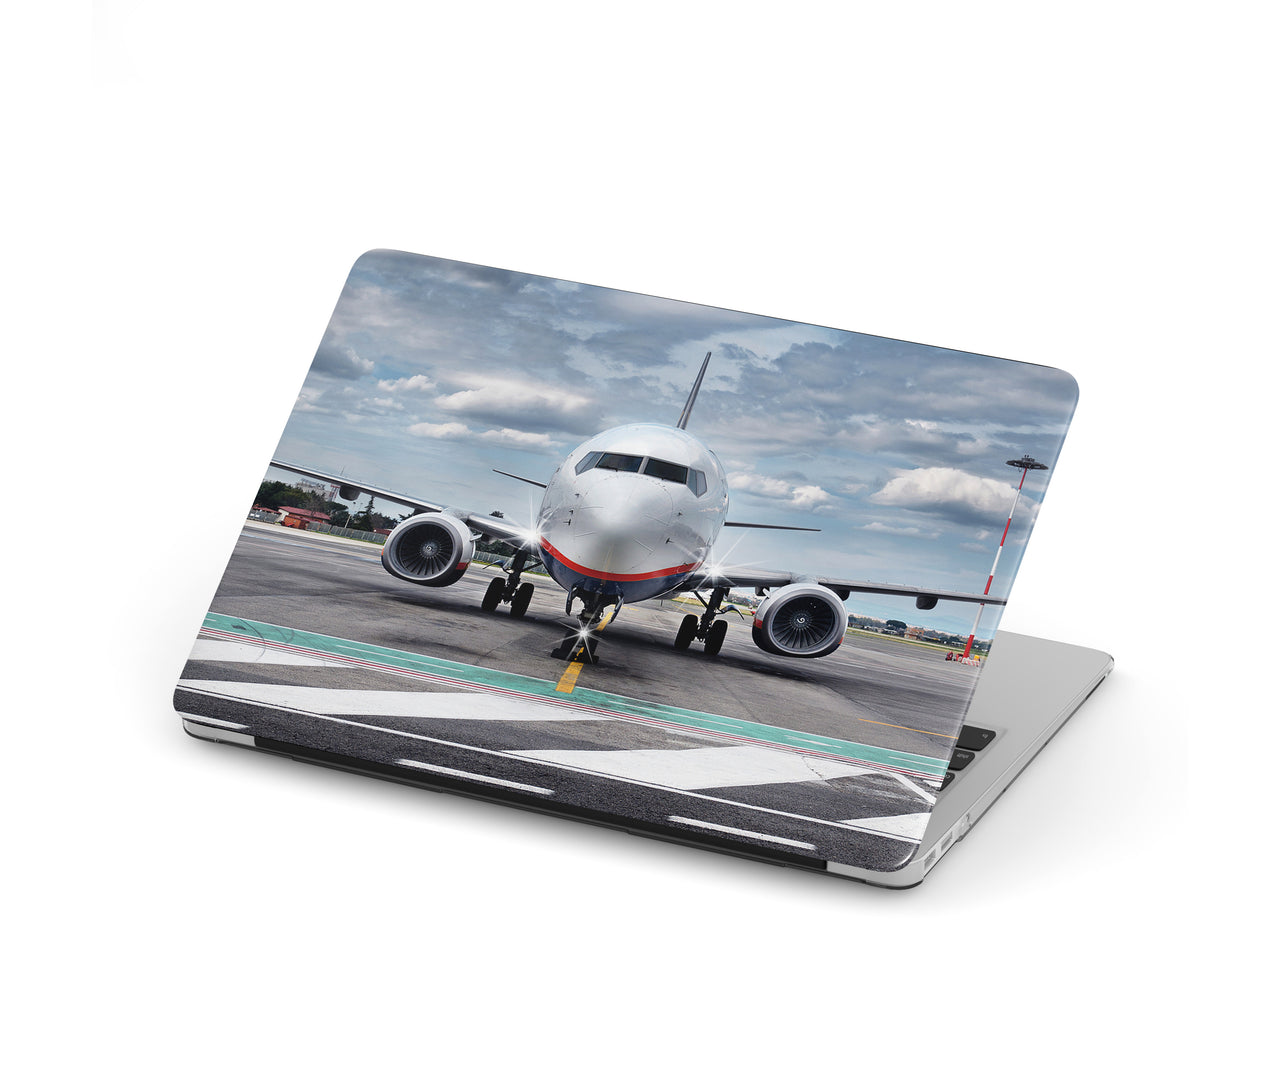 Amazing Clouds and Boeing 737 NG Designed Macbook Cases